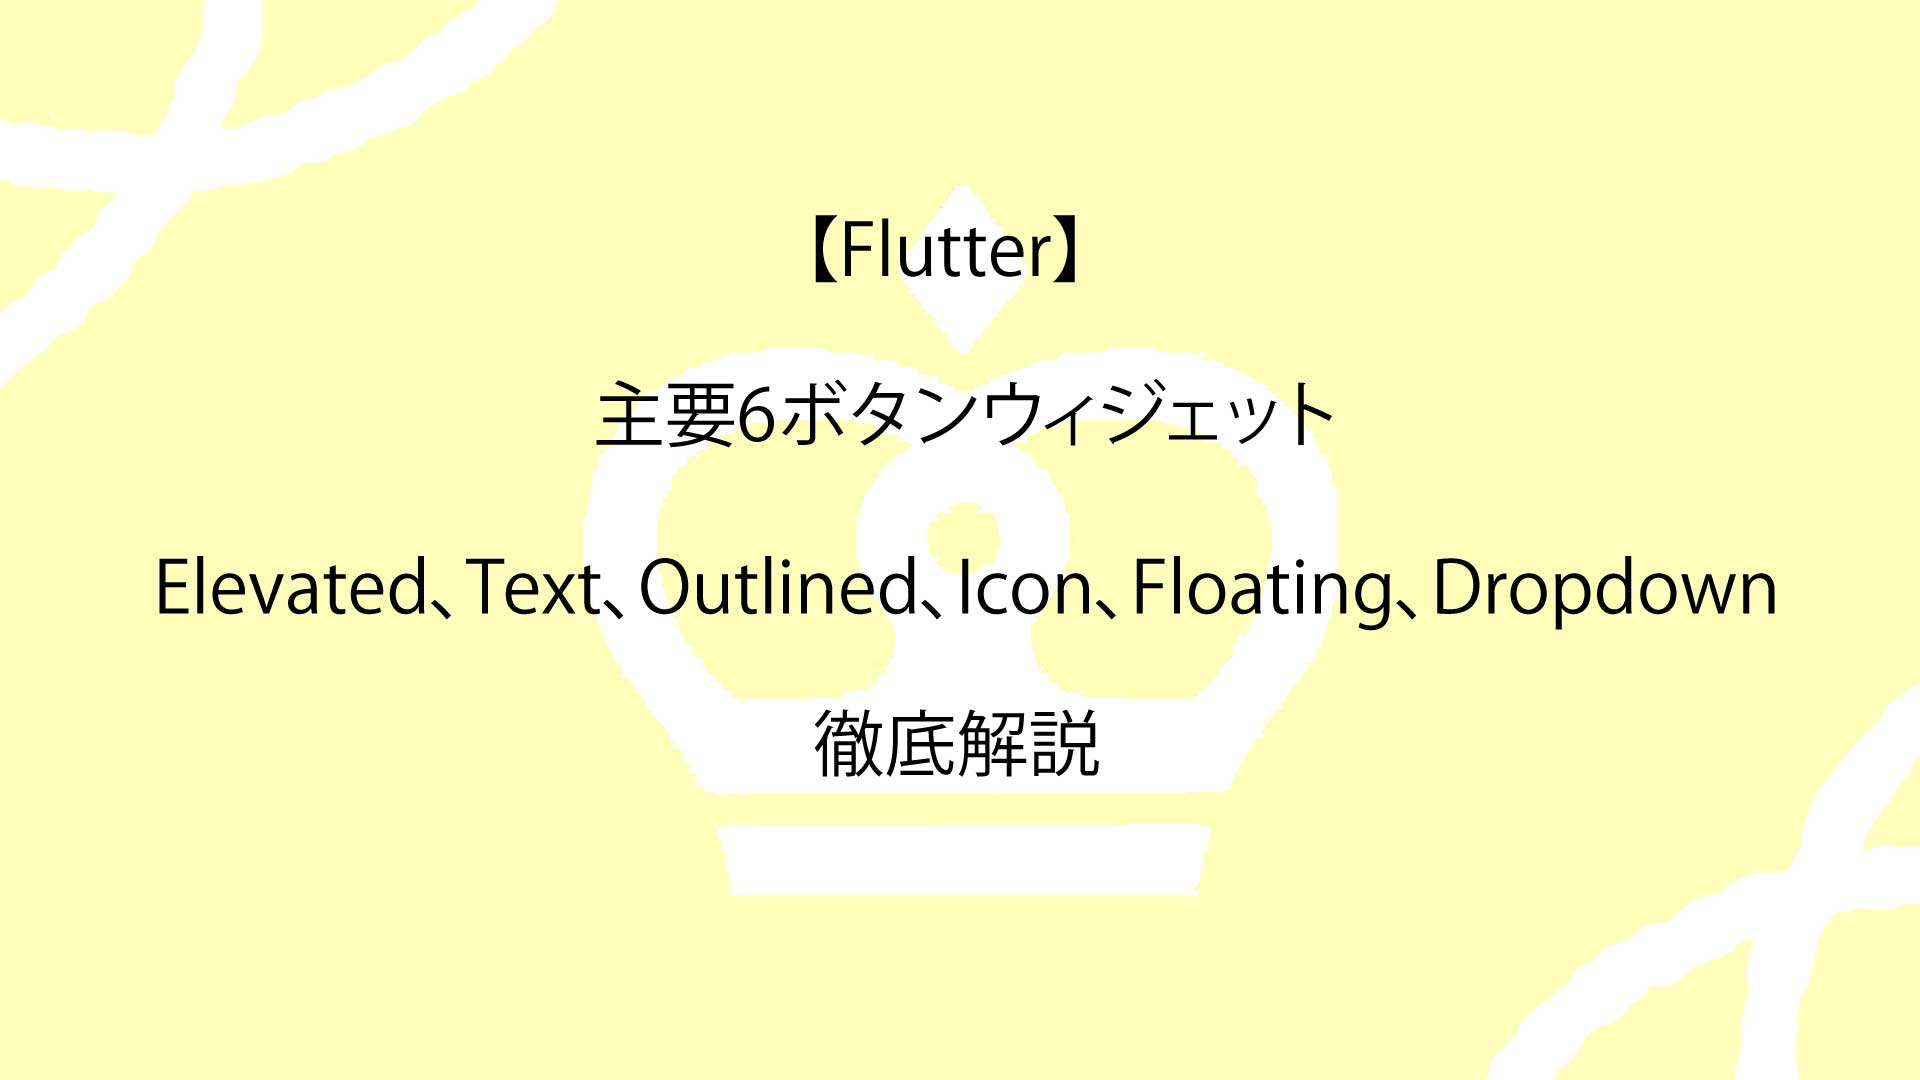 【Flutter】主要6ボタンウィジェット（Elevated、Text、Outlined、Icon、Floating、Dropdown）の徹底解説